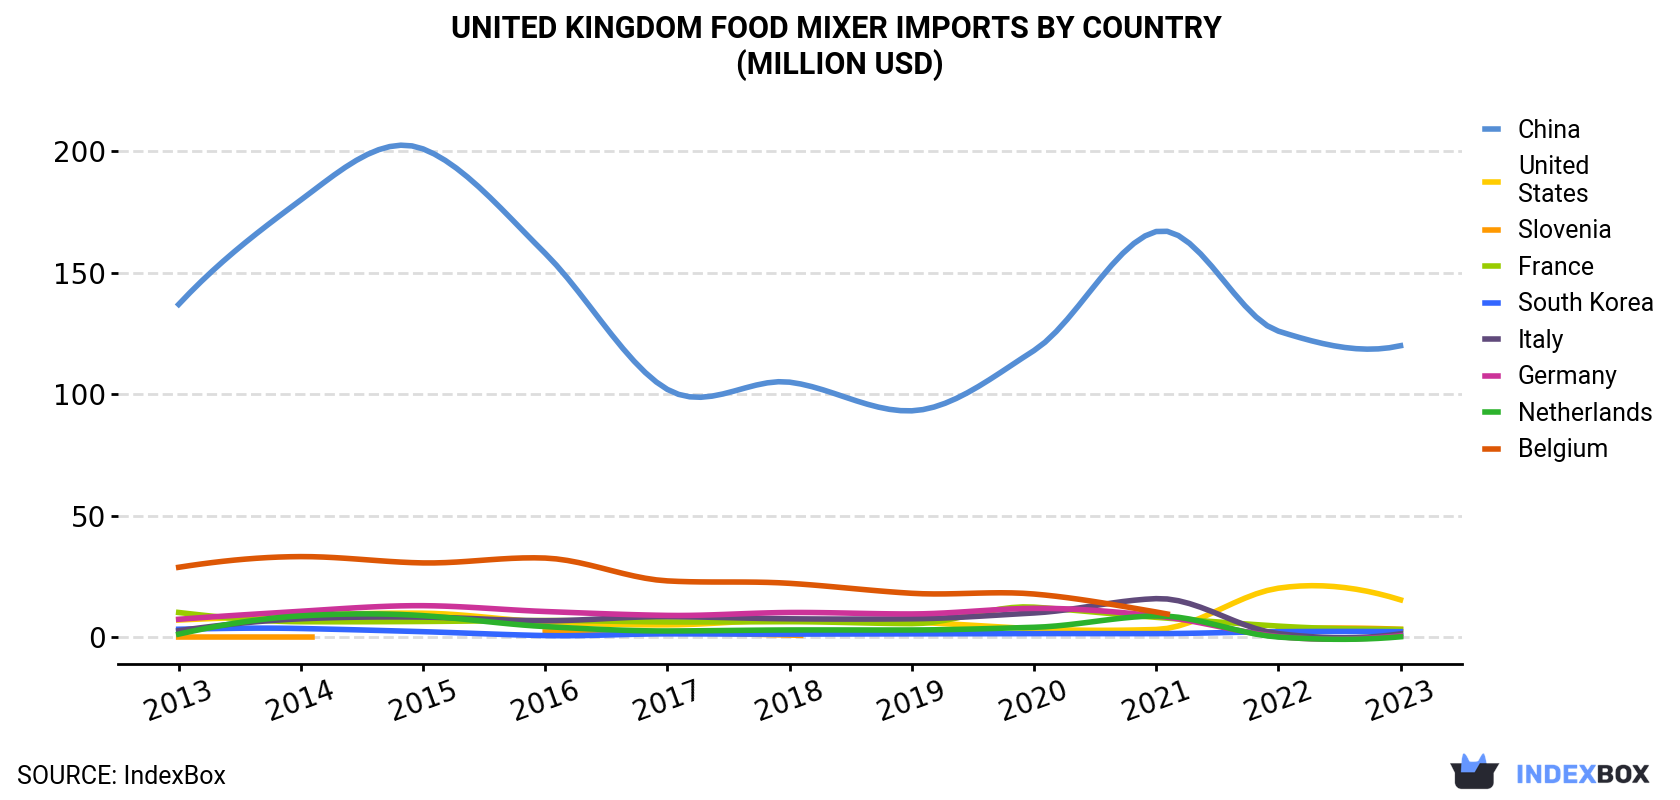 United Kingdom Food Mixer Imports By Country (Million USD)